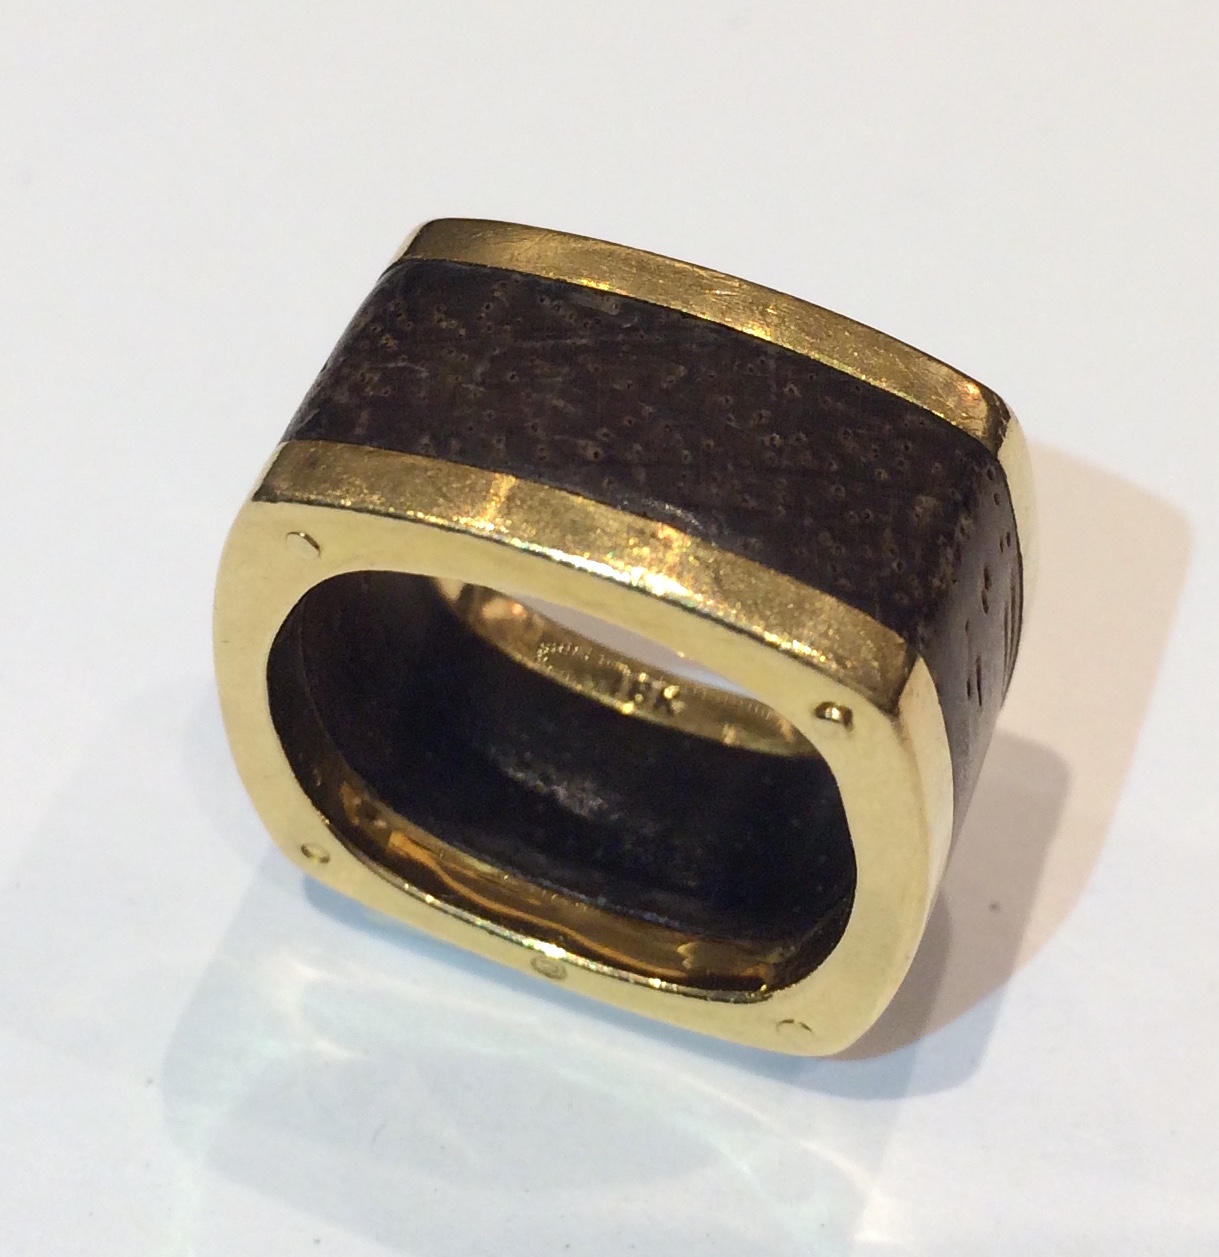 Cartier / Dinh Van “Squared” Walnut and 18K gold ring, signed, c. 1970’s